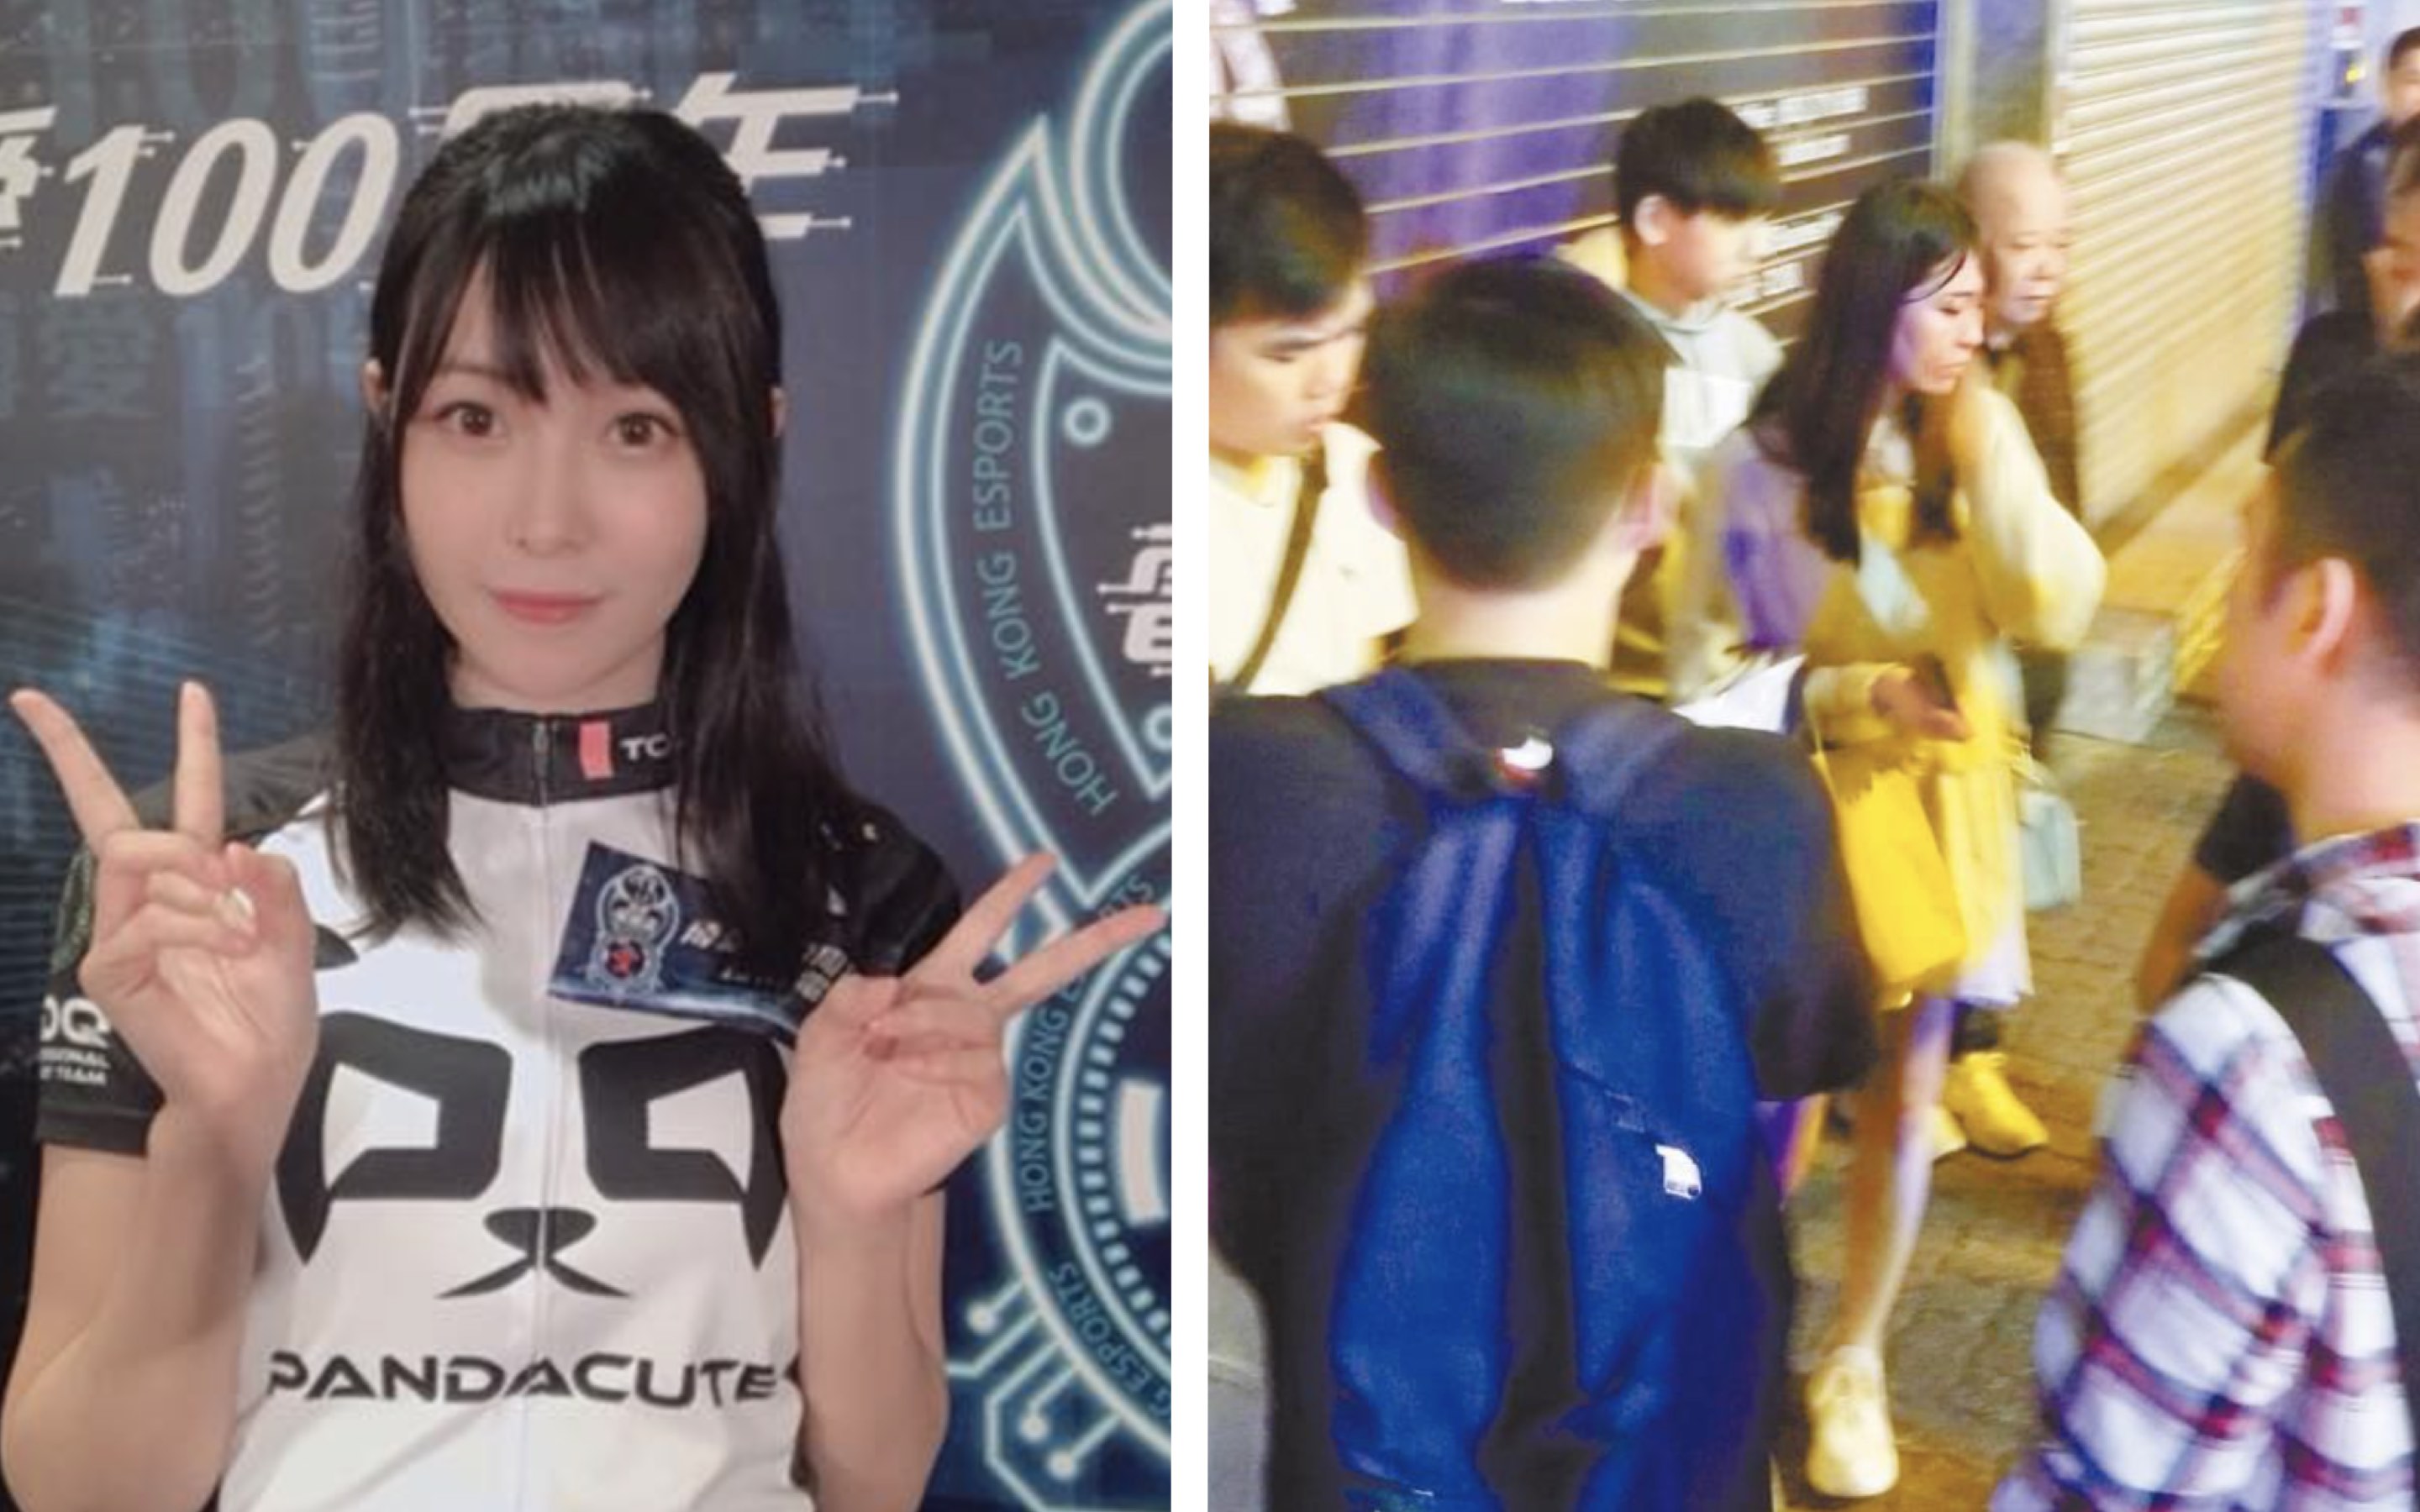 ‘Esports’ athlete Deer Chan (left), and the scene in Mong Kok on Saturday after a man was arrested for tailing her and taking photos. Photos via Facebook/Deer Chan and Apple Daily.